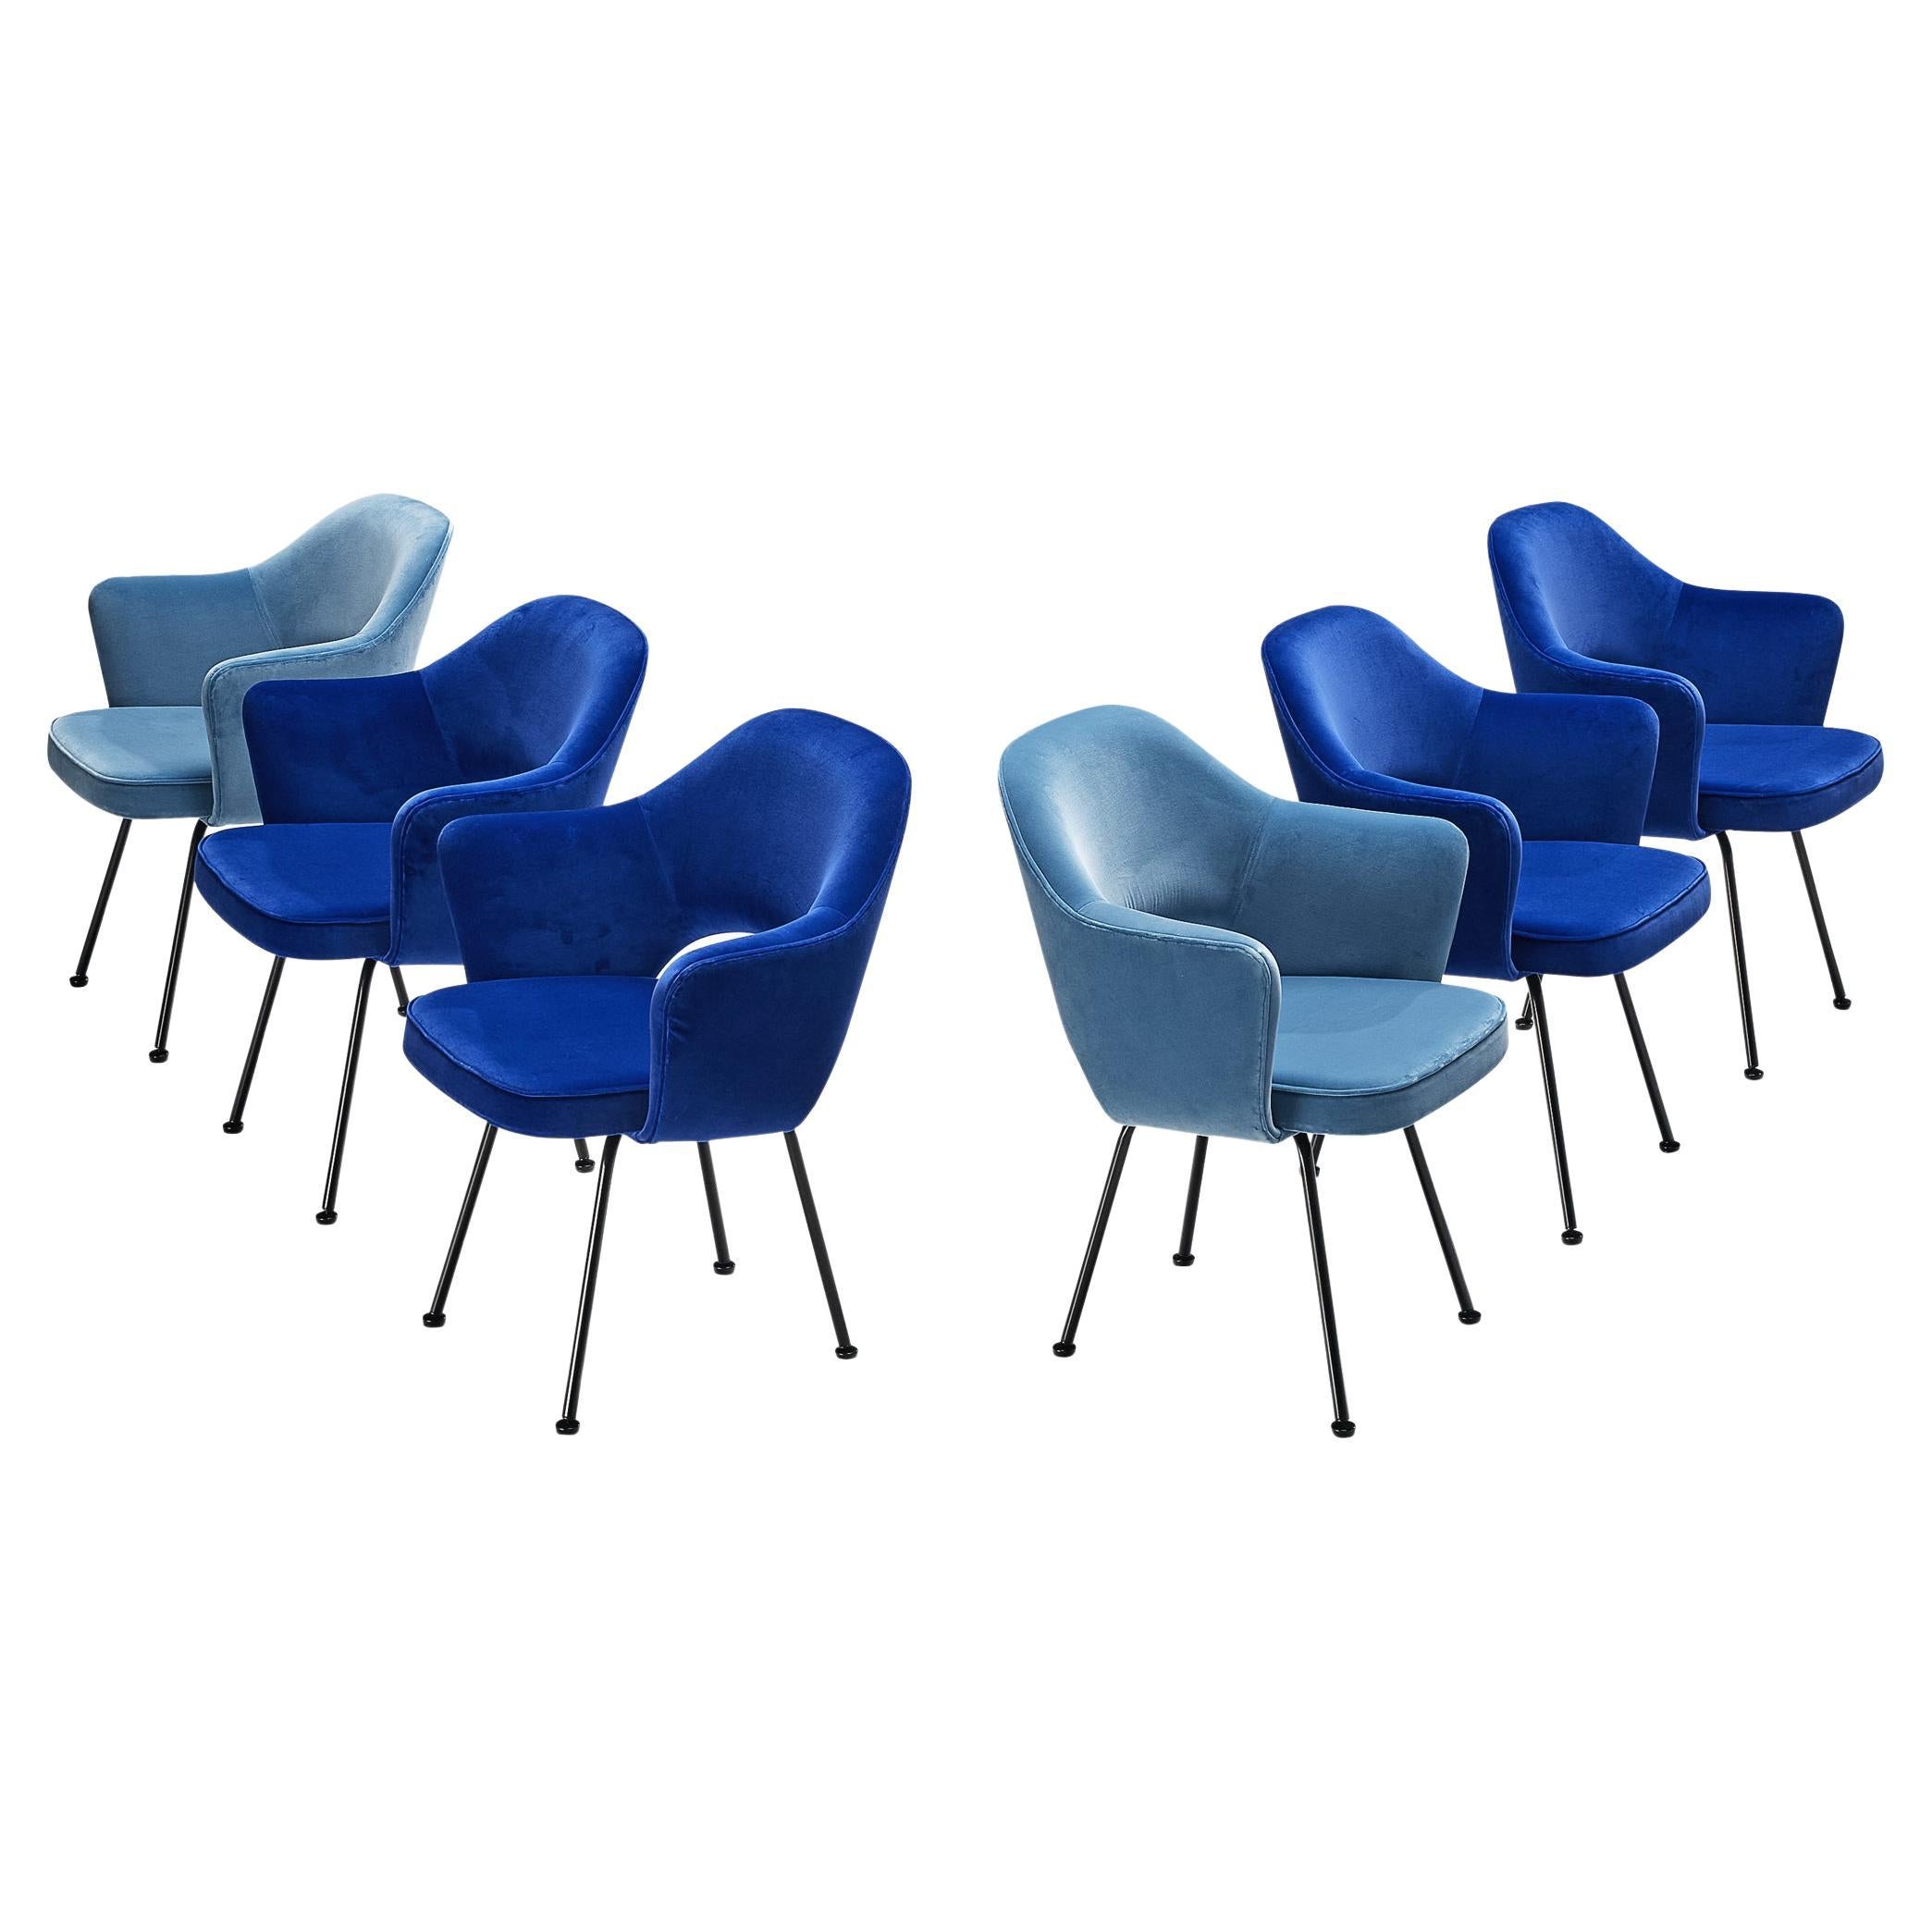 Eero Saarinen for Knoll Set of Six Dining Chairs in Blue Upholstery